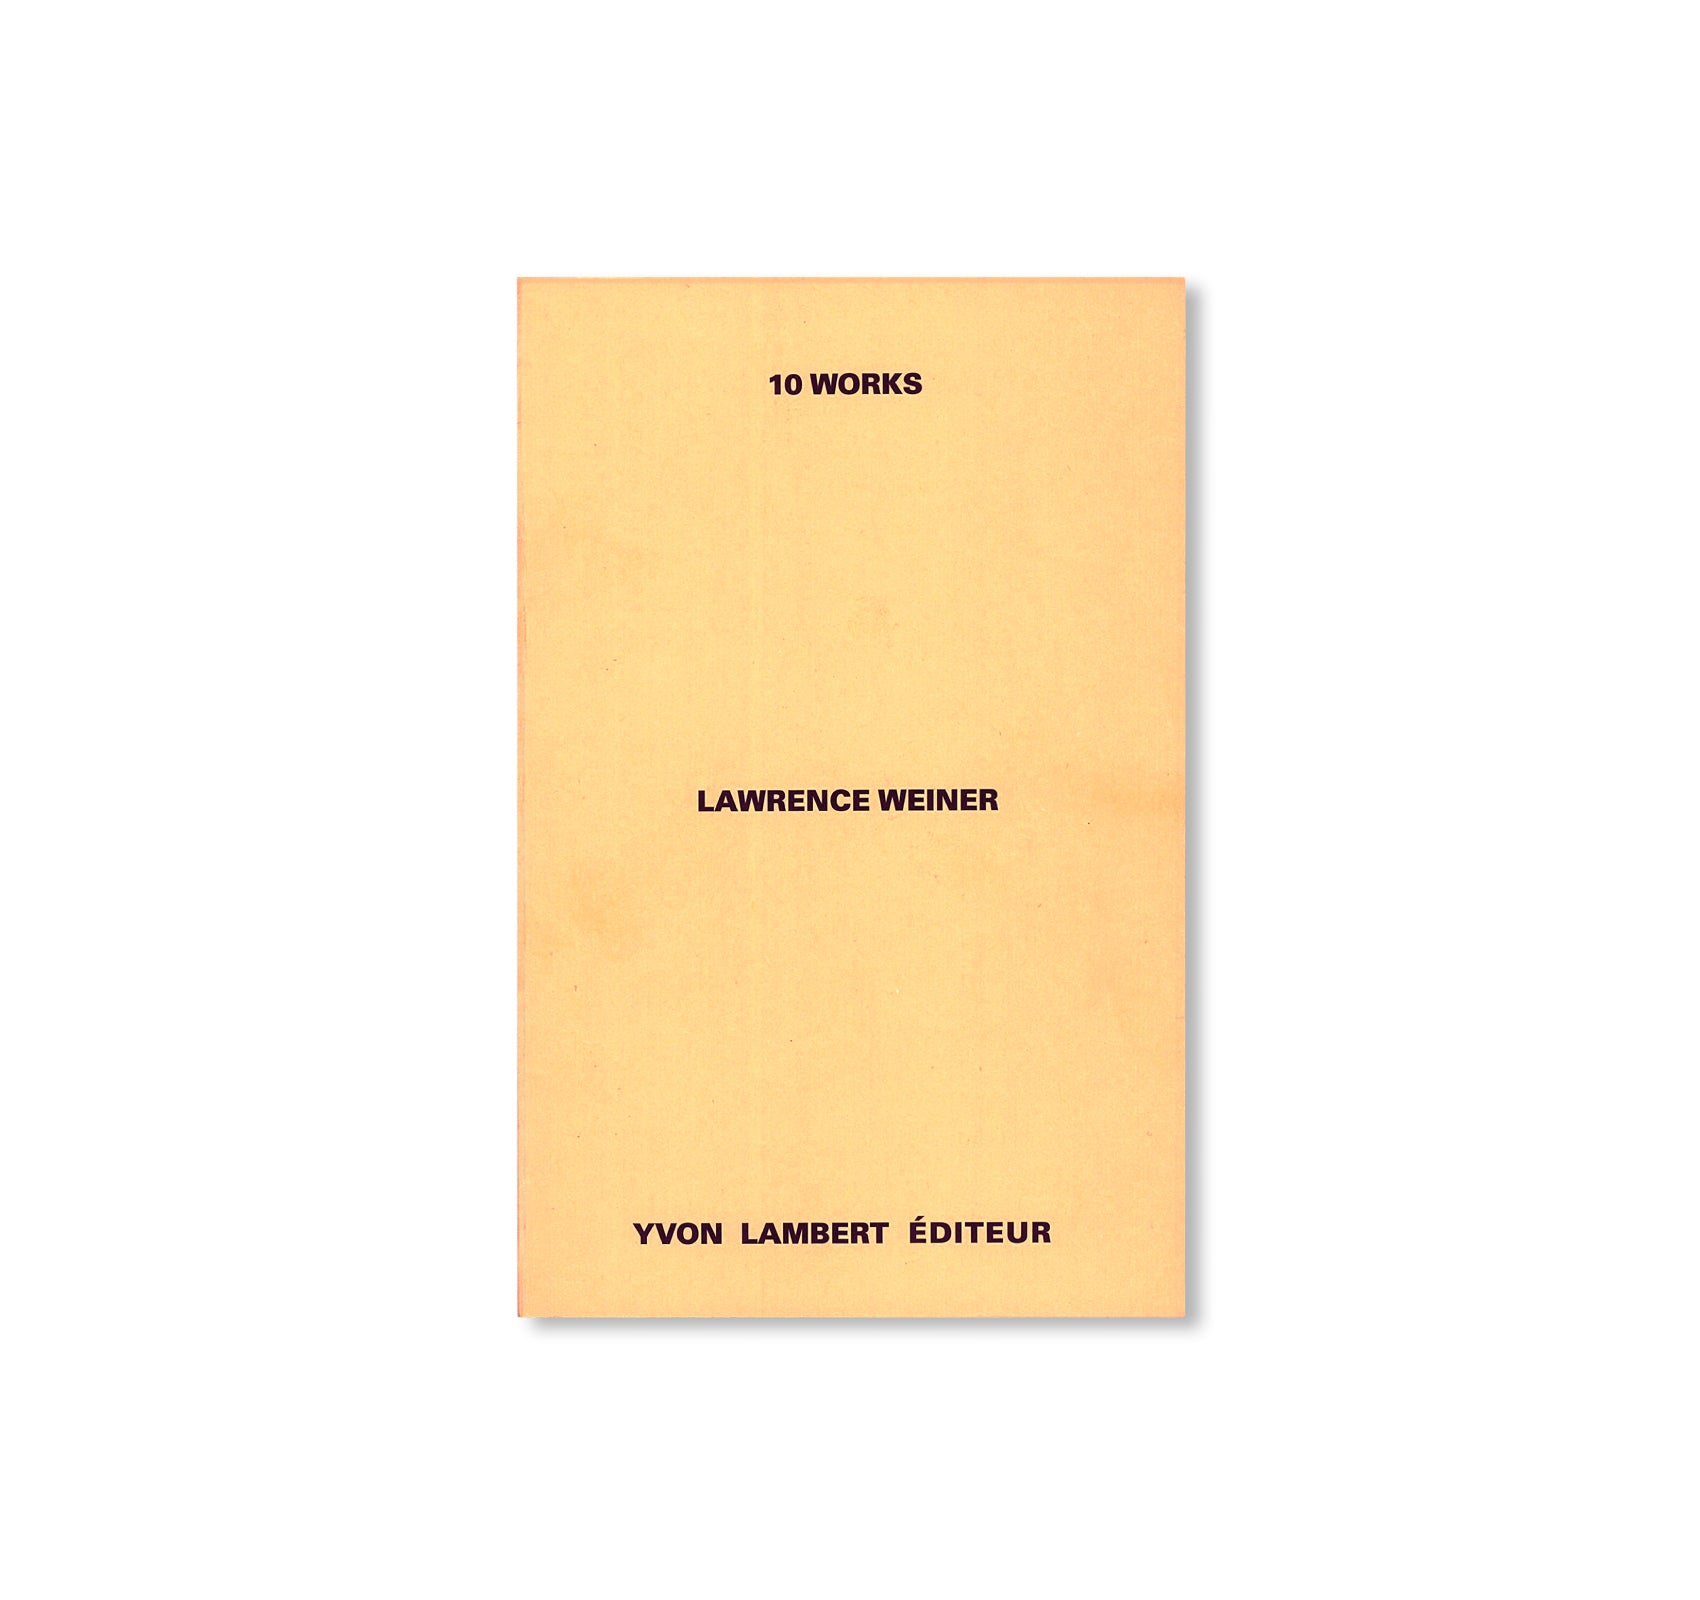 10 WORKS by Lawrence Weiner